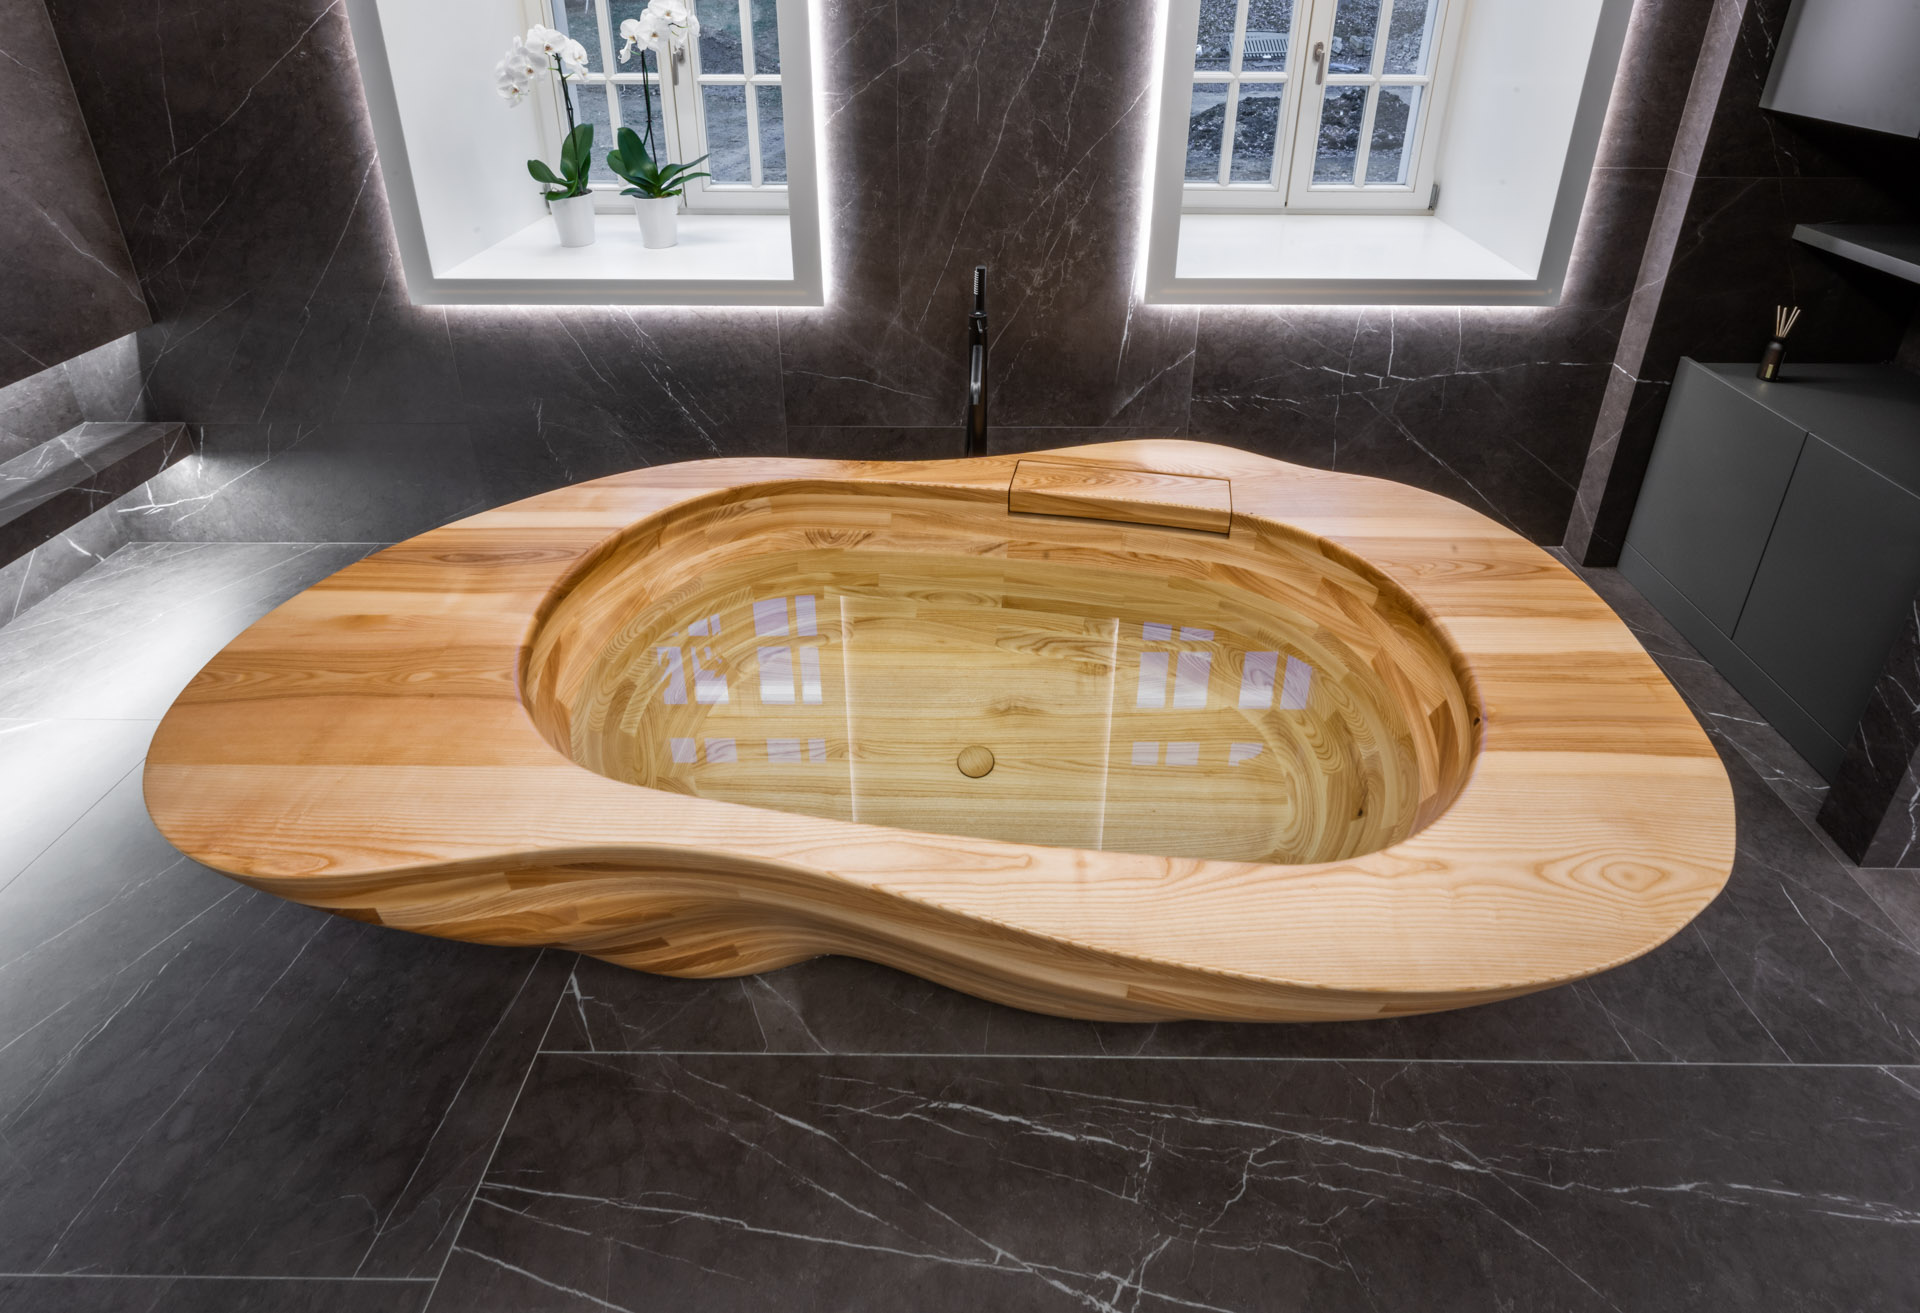 Image no. 3 of Custom bathtub and washbasin crafted in Ash wood - Defacto